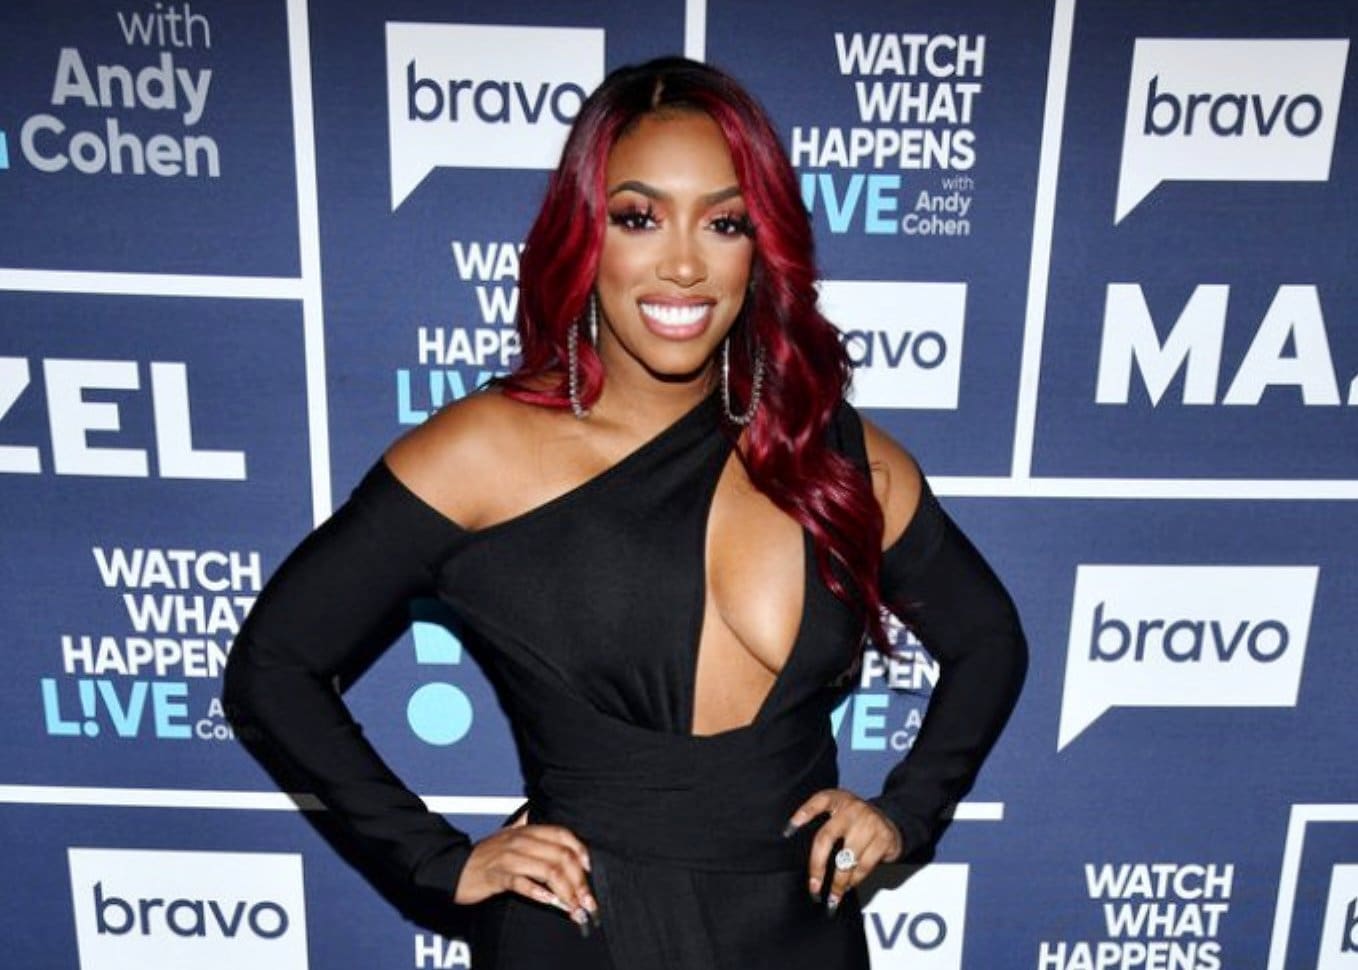 Porsha Williams Wishes A Happy Birthday To Her Cousin - Check Out The Post She Used To Mark The Event